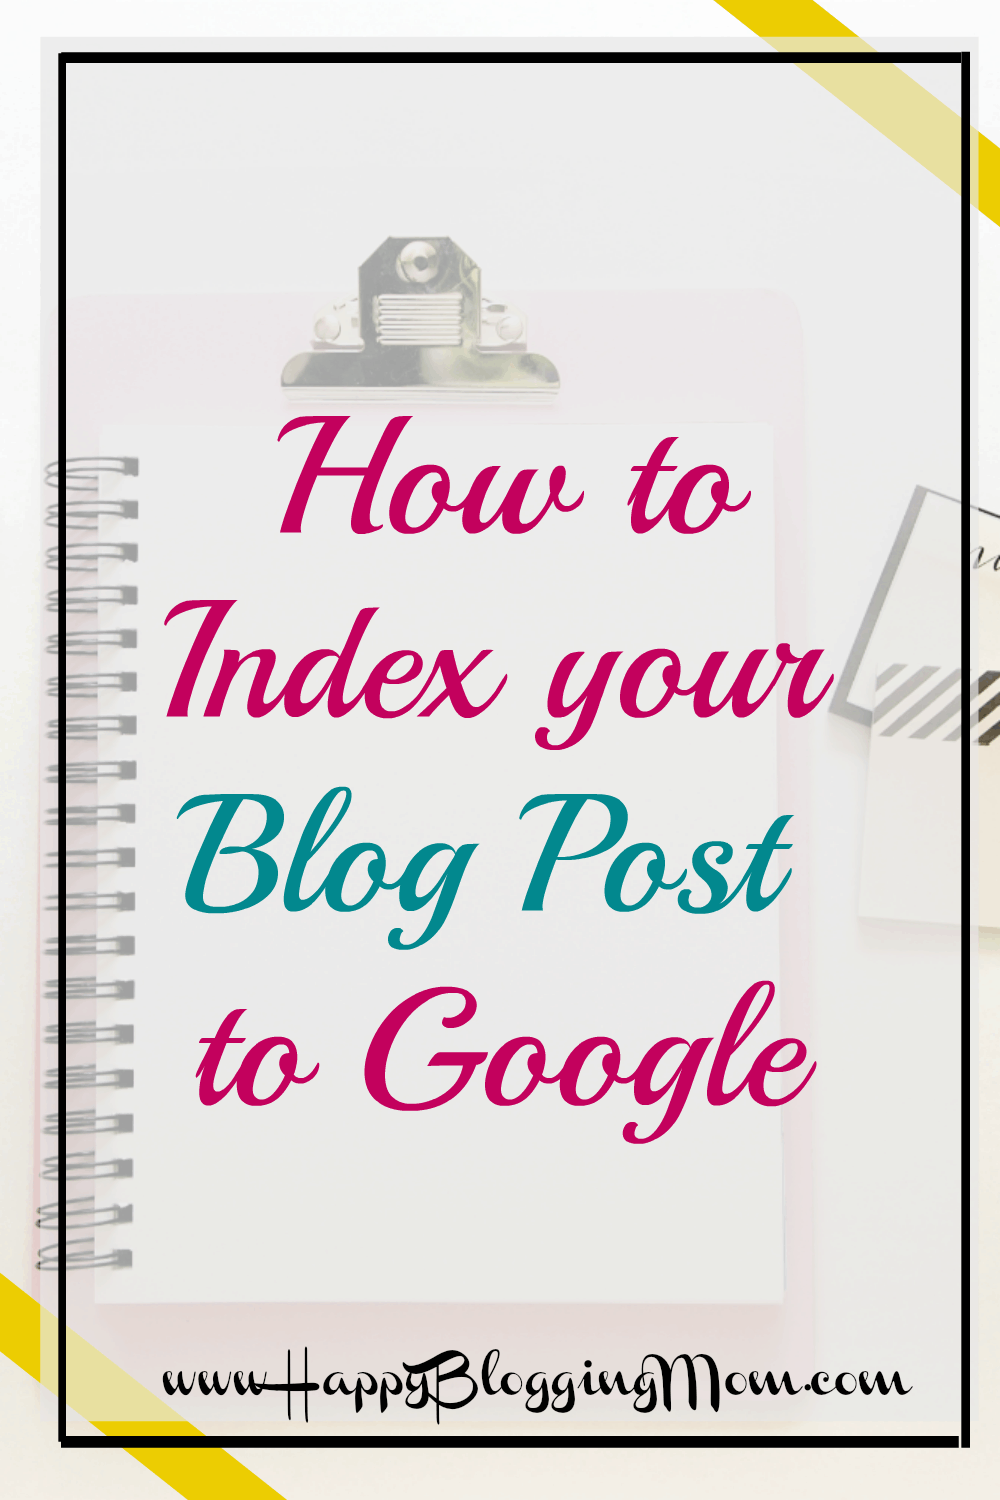 How to index your blog post to google